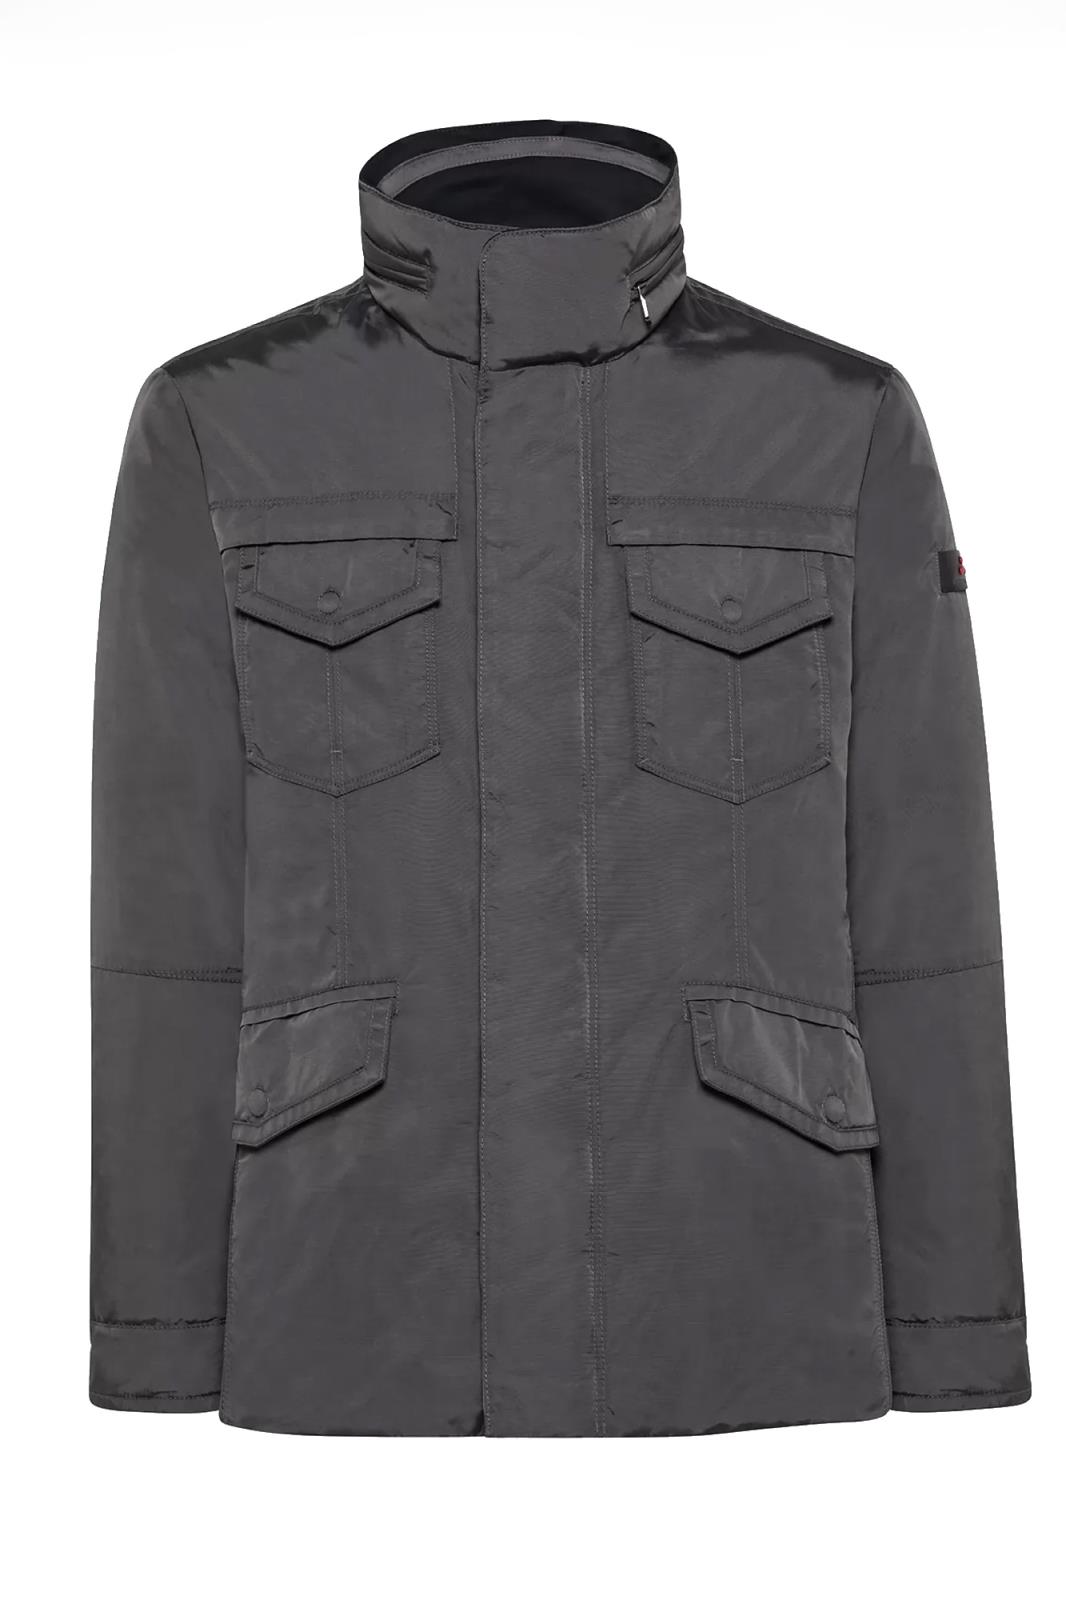 PEUTEREY Field jacket in technical oxford fabric